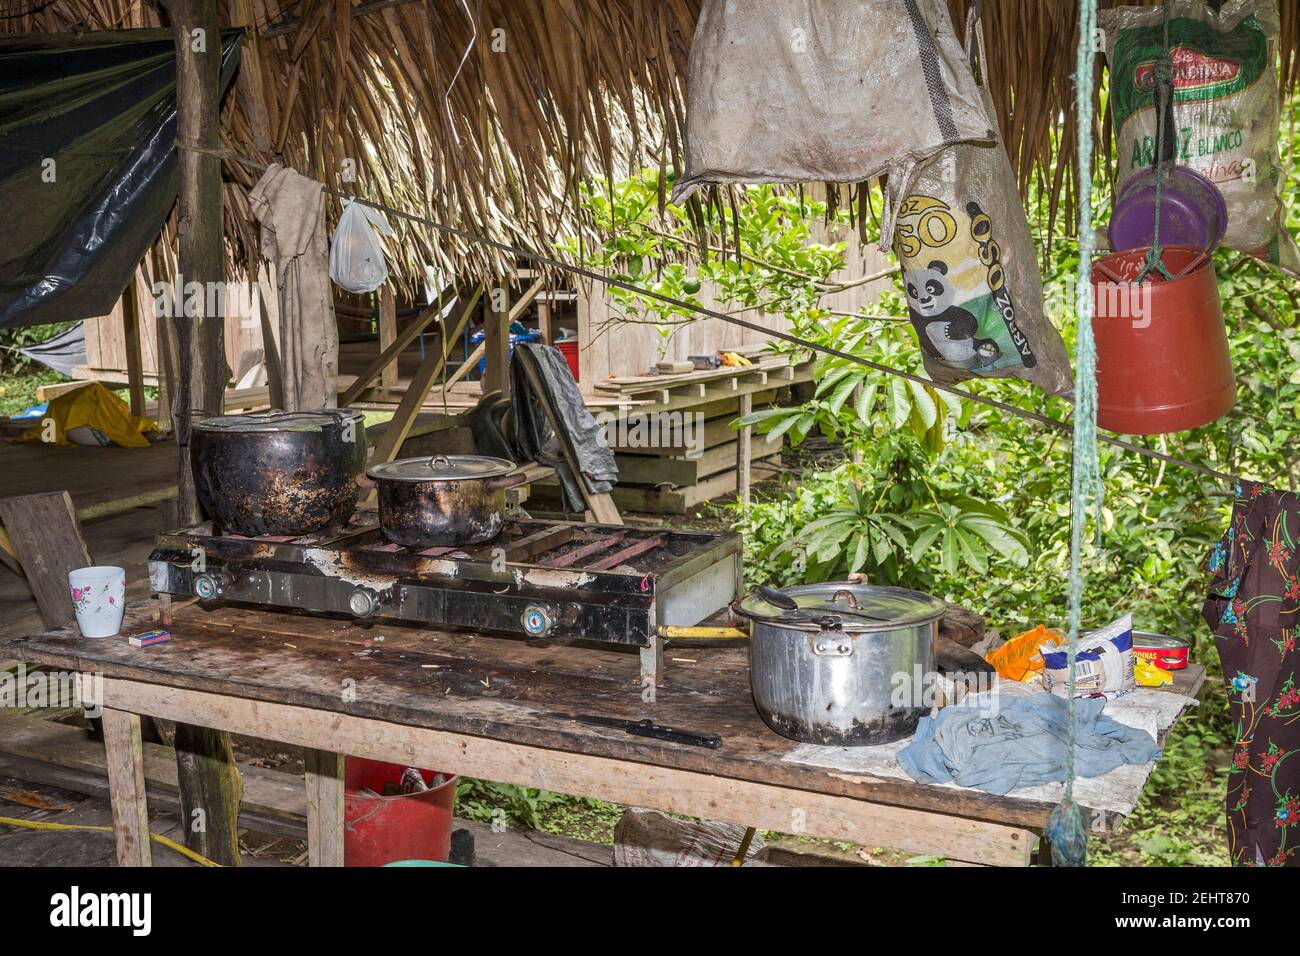 Gas cannister fired hob  in Quechua home, local people, Amazon rainforest, Yasuni National Park, Napo River, Ecuador Stock Photo